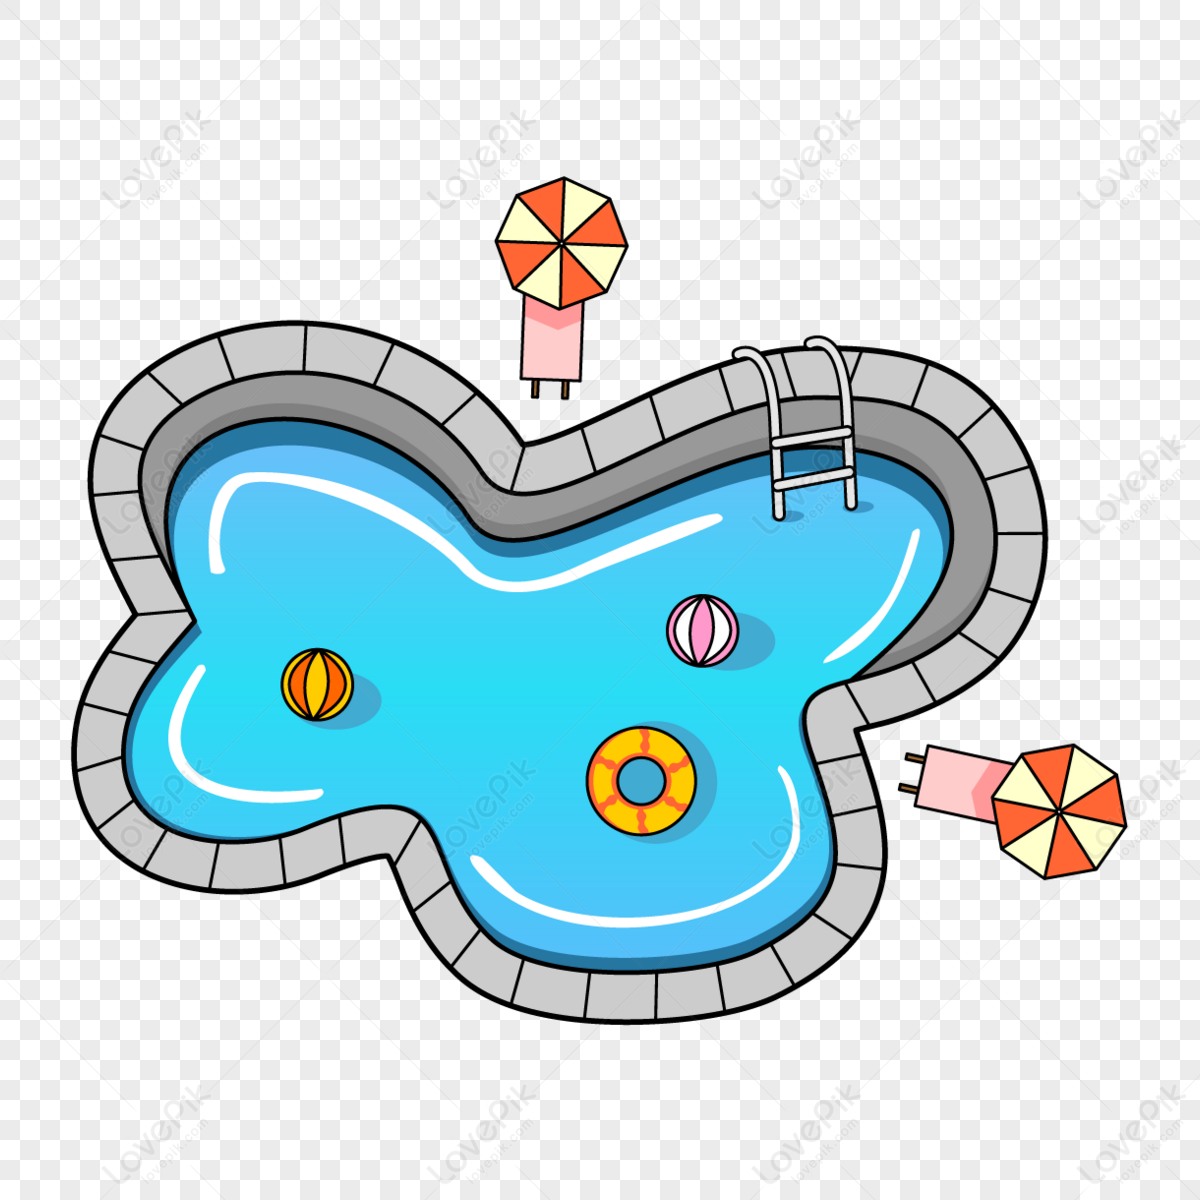 Flower Shaped Swimming Pool Clip Art,recliners,water PNG Transparent ...